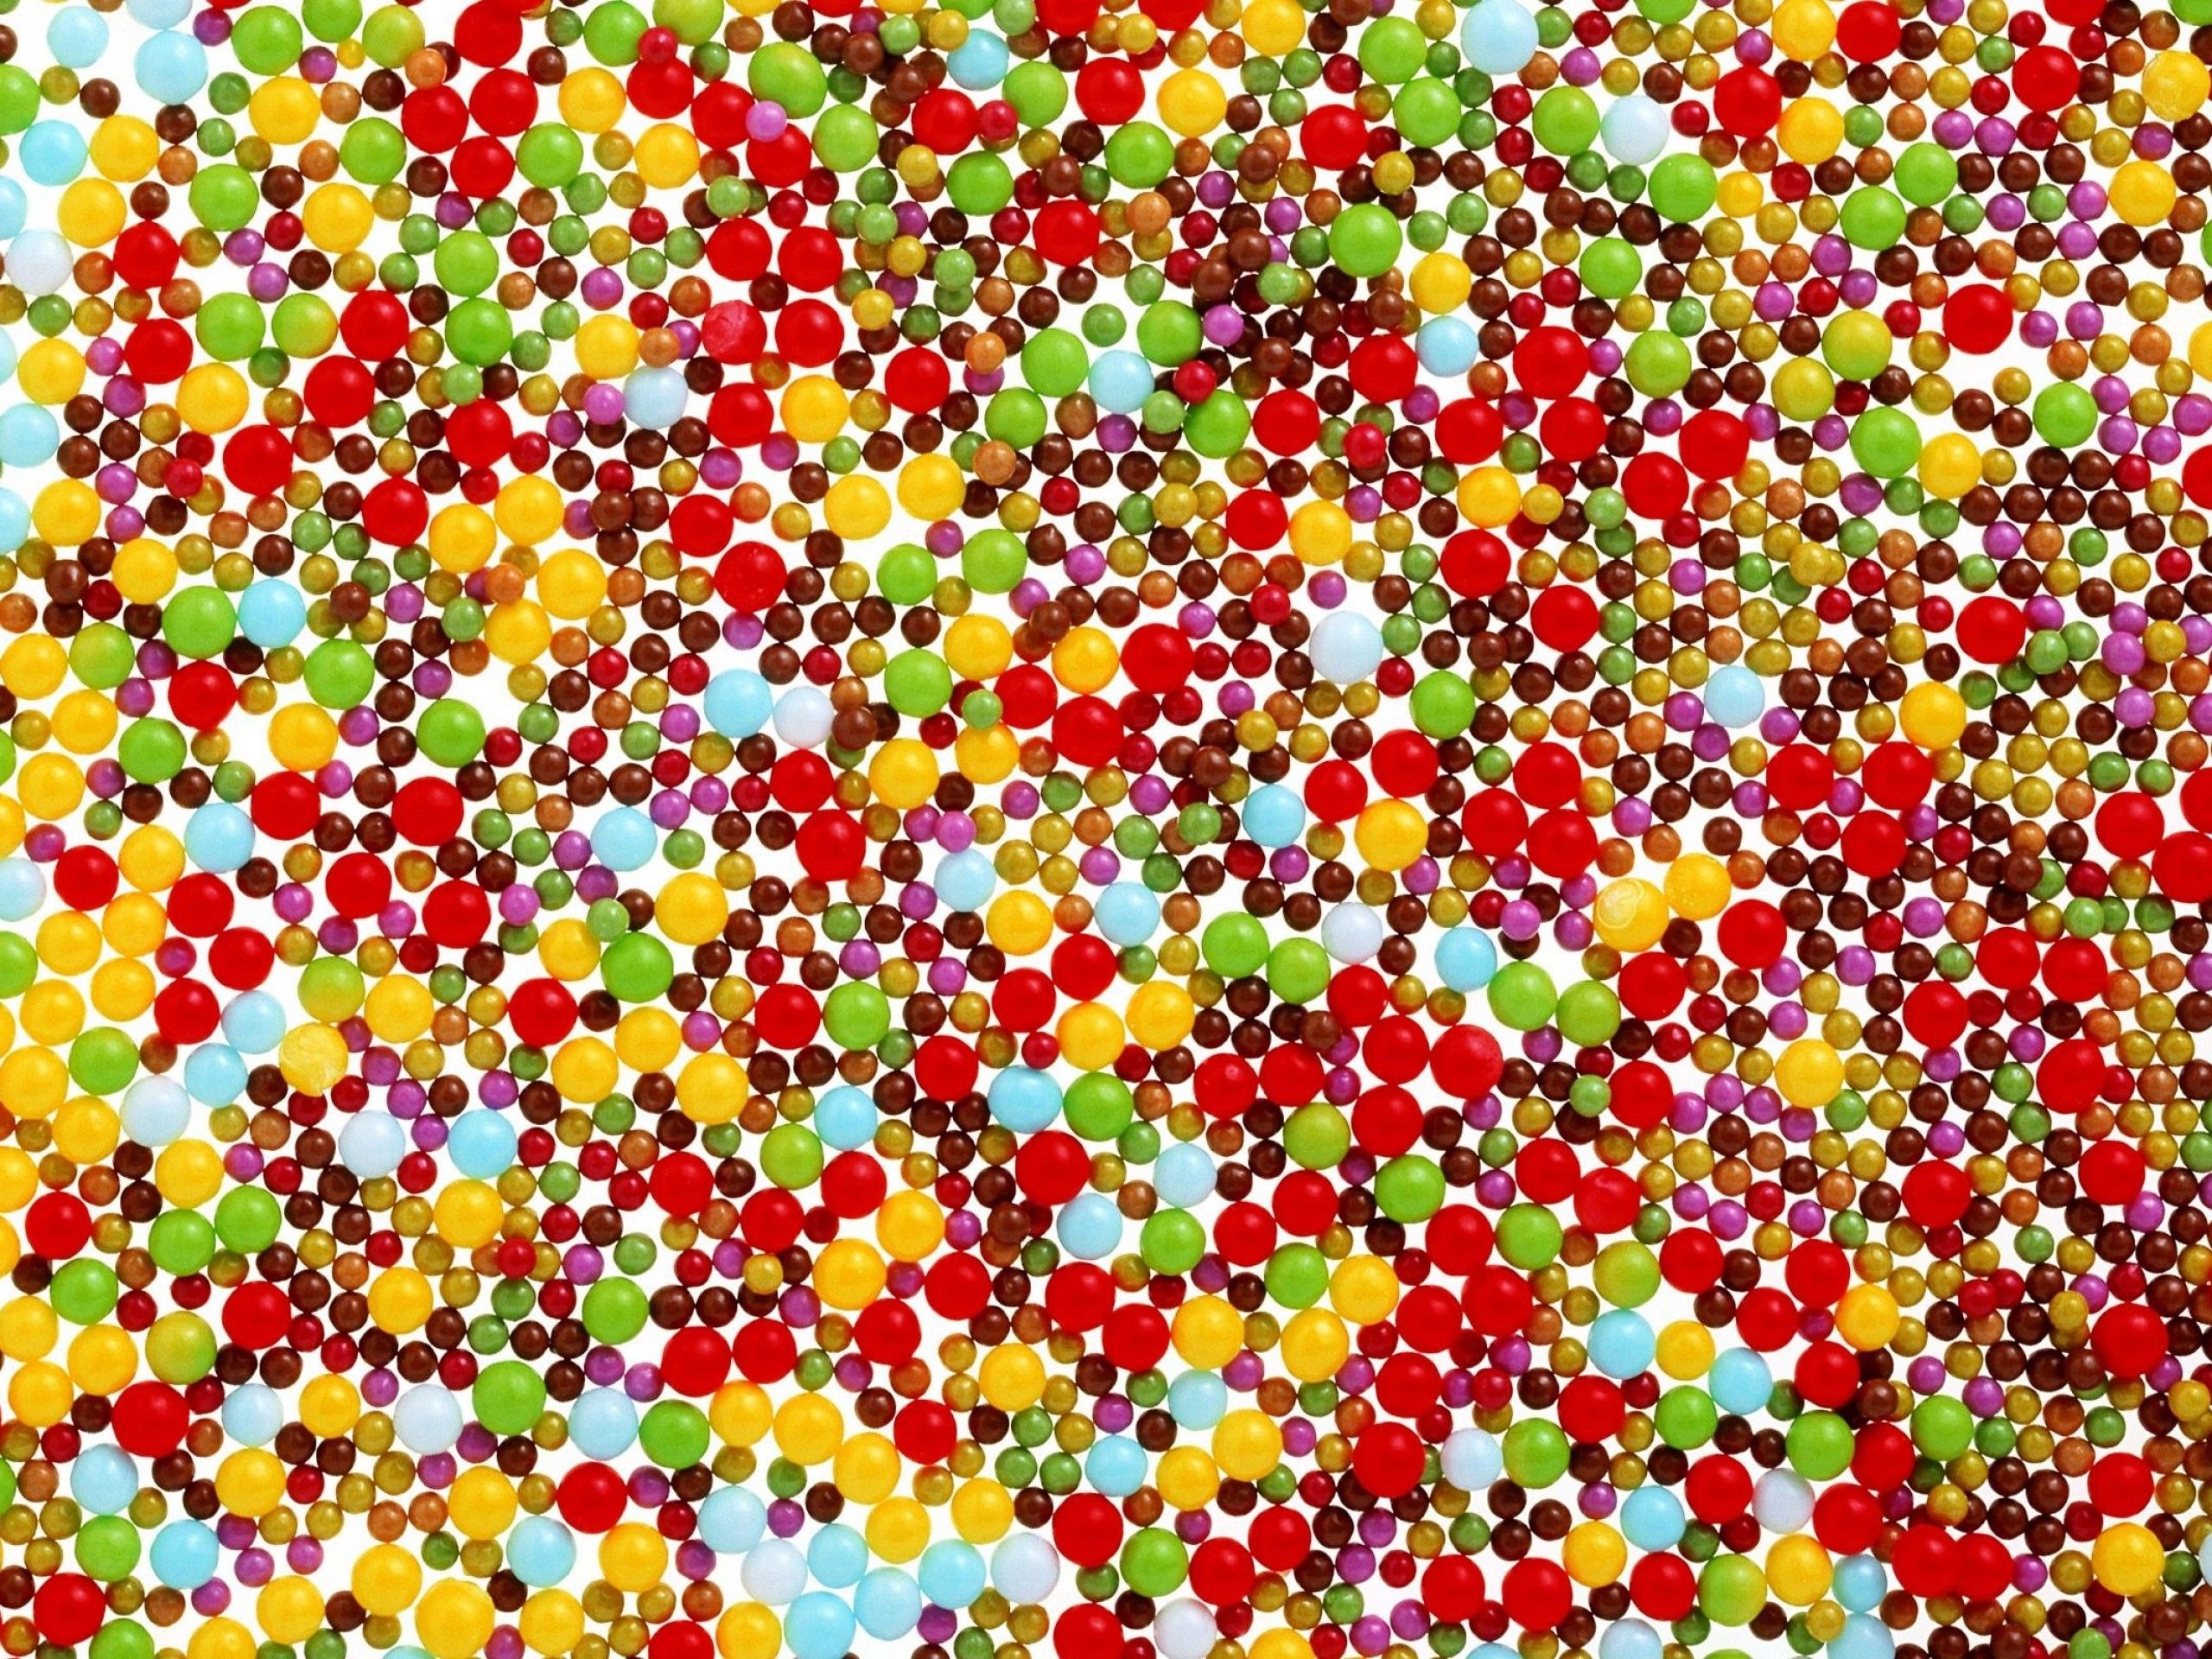 Abstract Tumblr Wallpaper, Art, Colors, free Image, candies